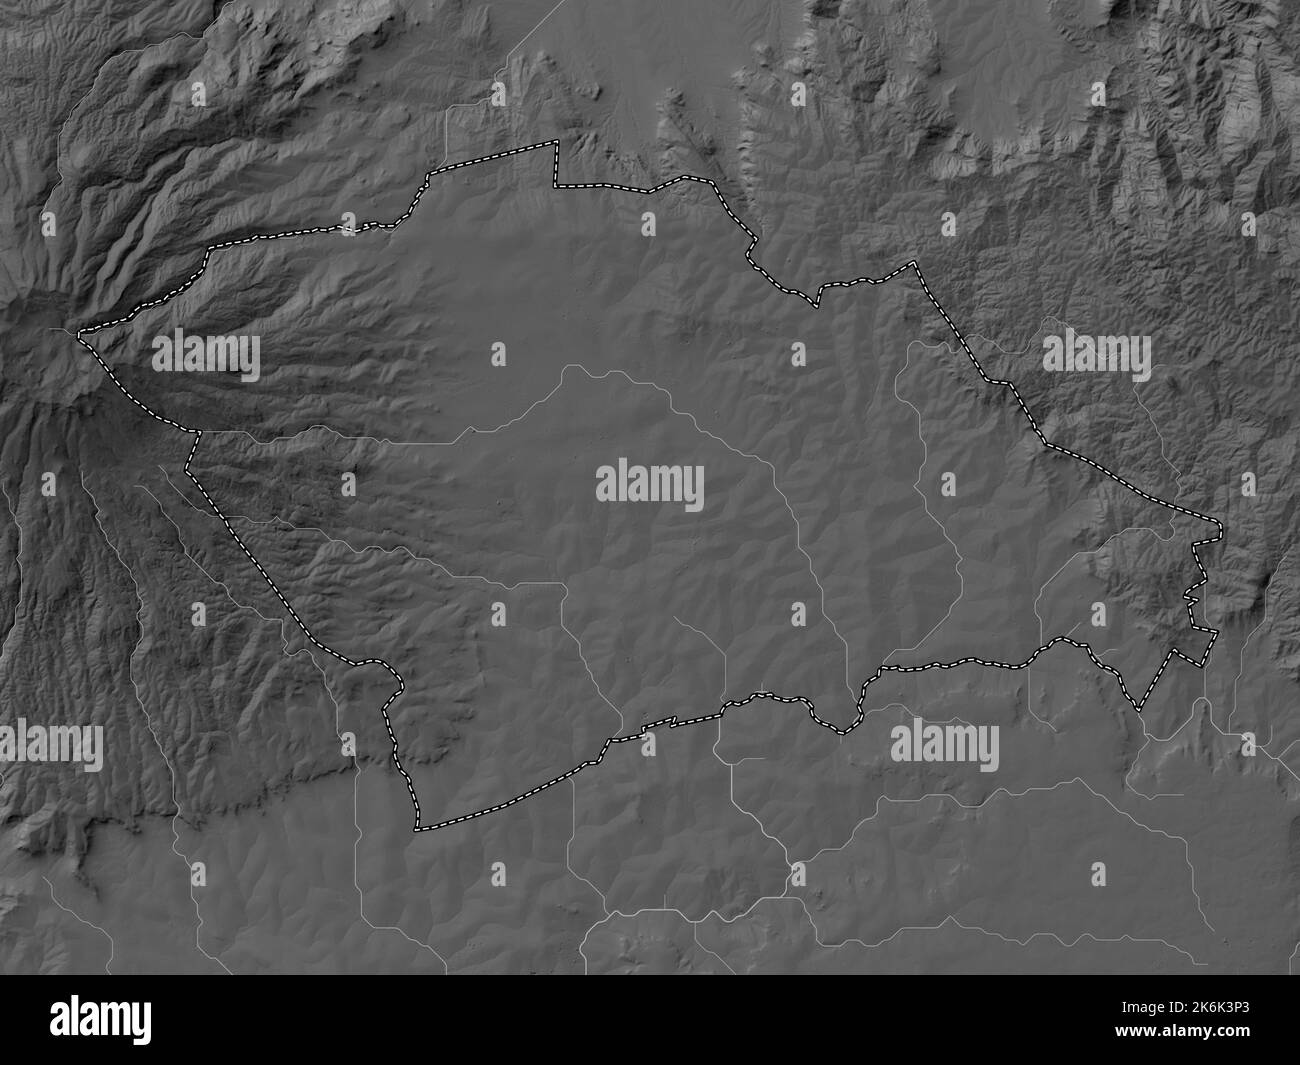 Trans Nzoia, county of Kenya. Grayscale elevation map with lakes and rivers Stock Photo